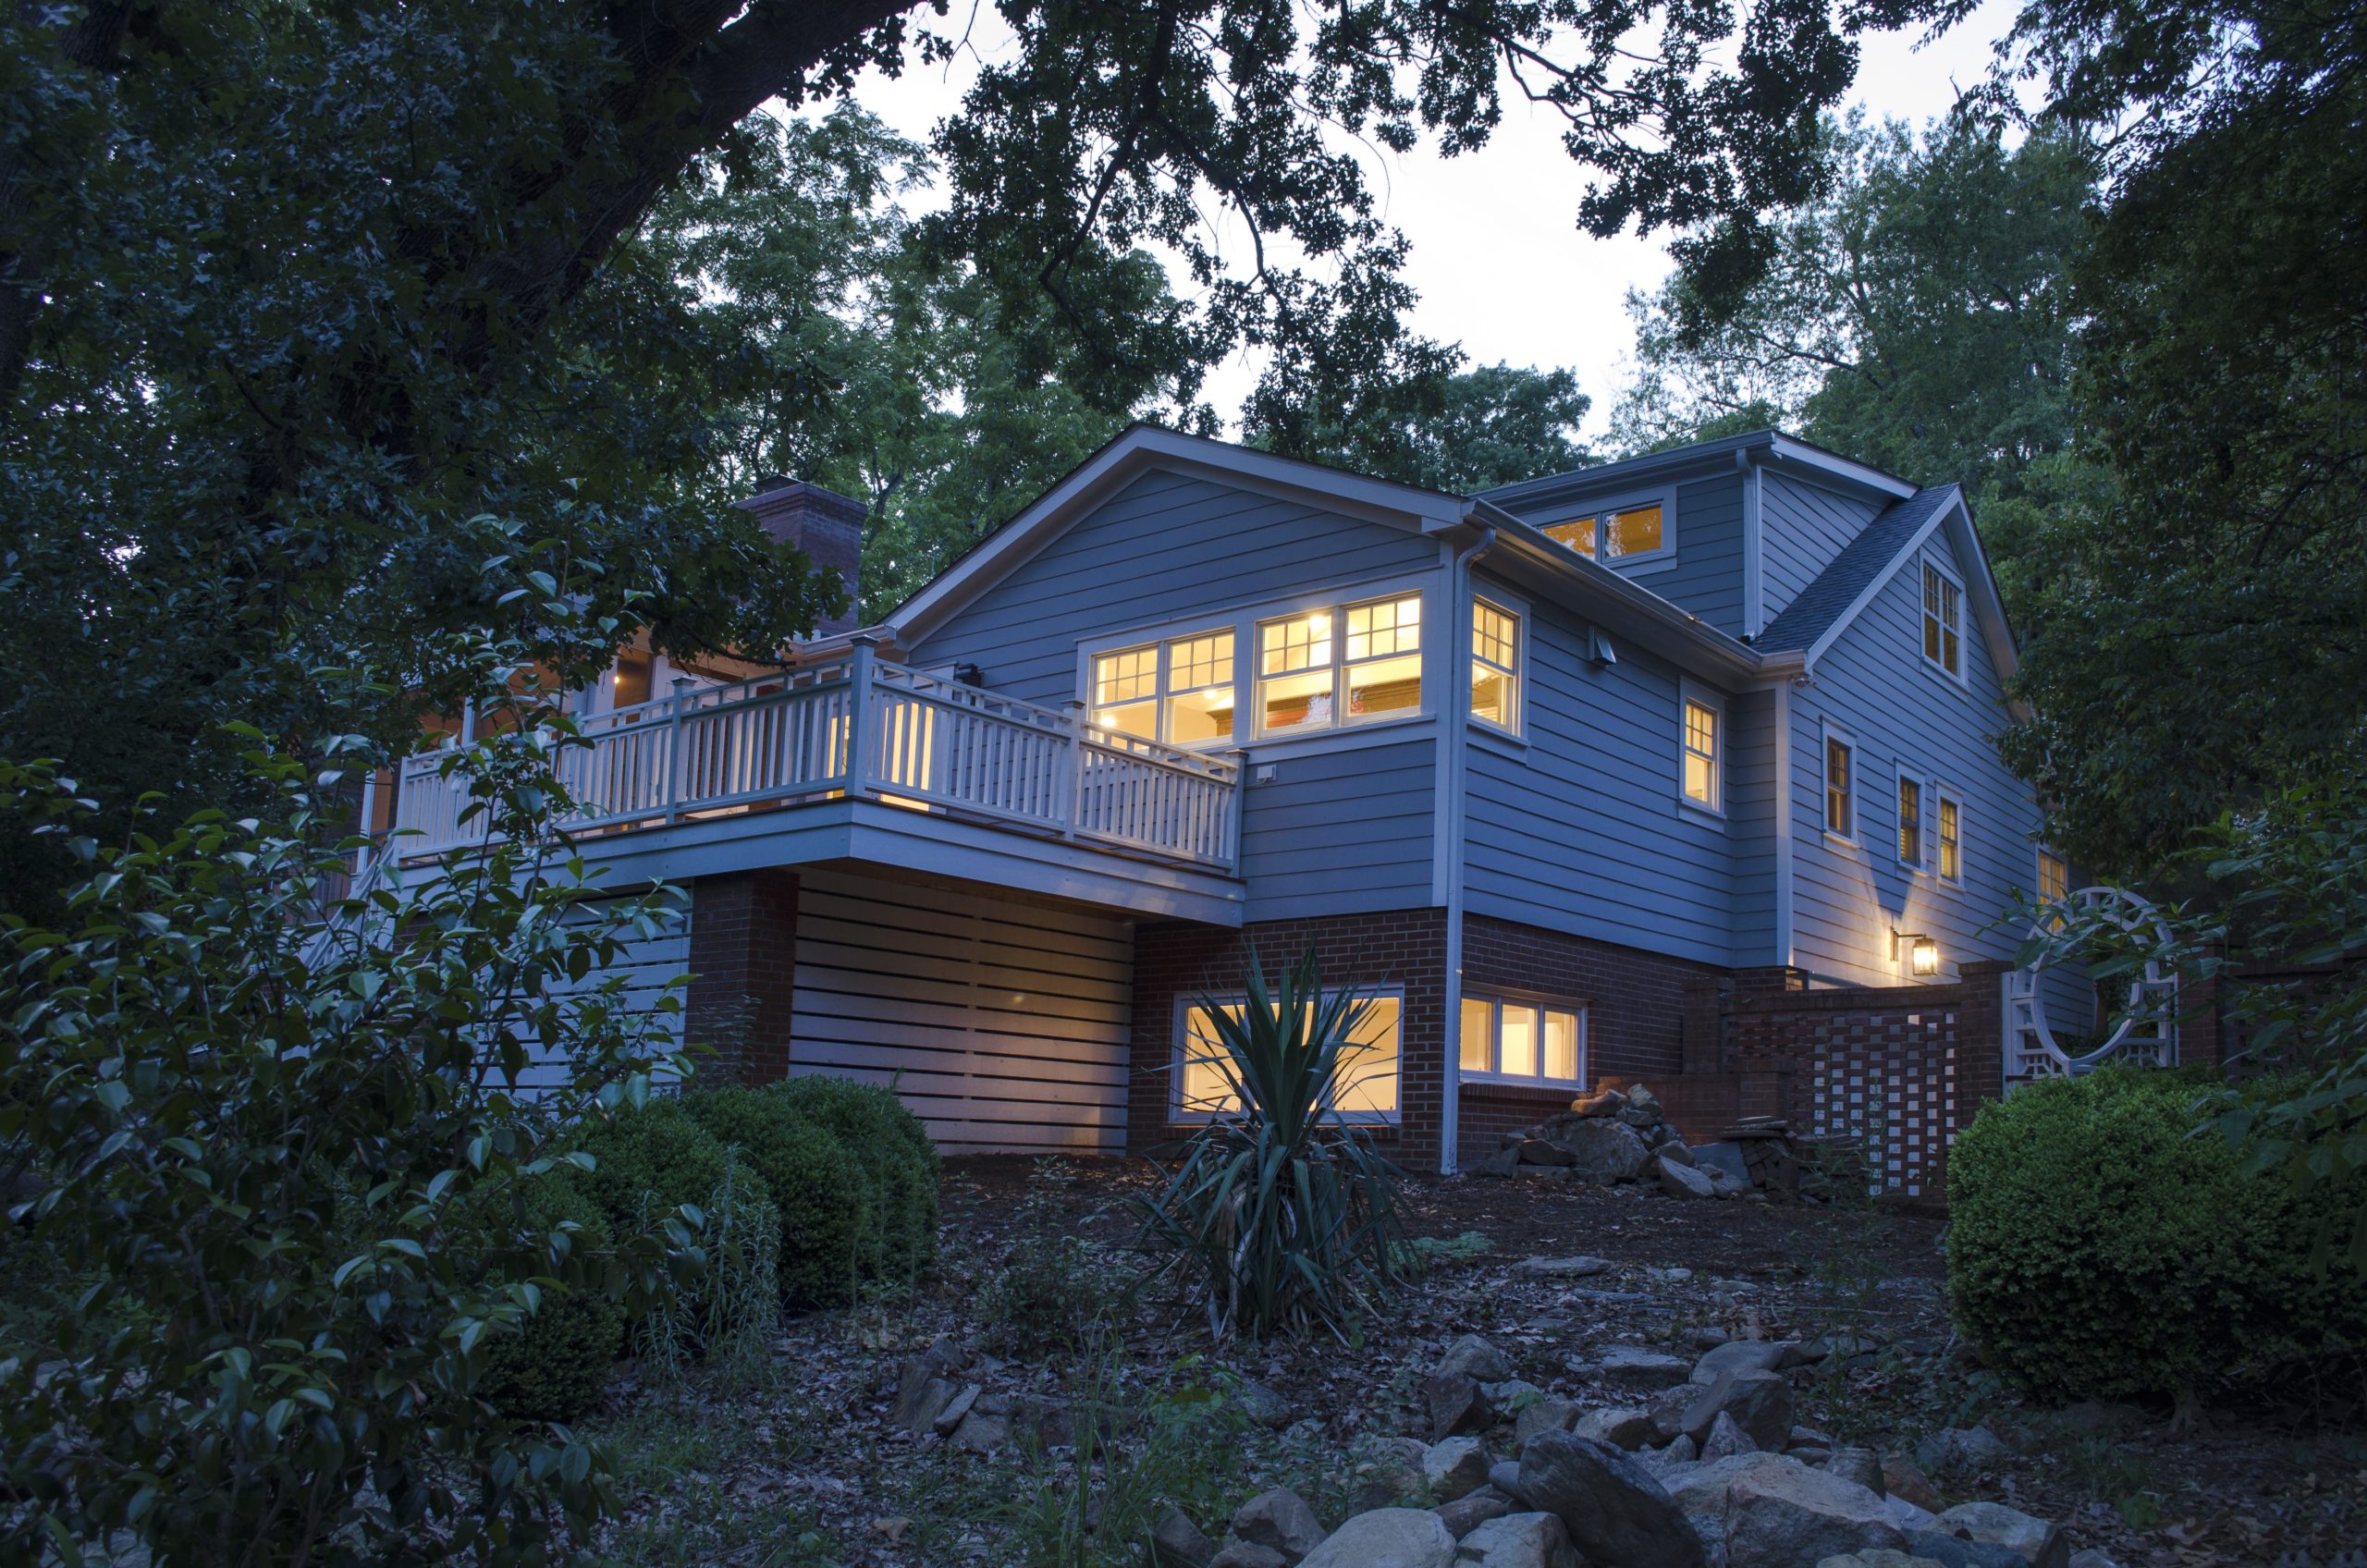 An exterior view of the back of the house at dusk, showing the new deck and porch as the house emits a warm glow from within